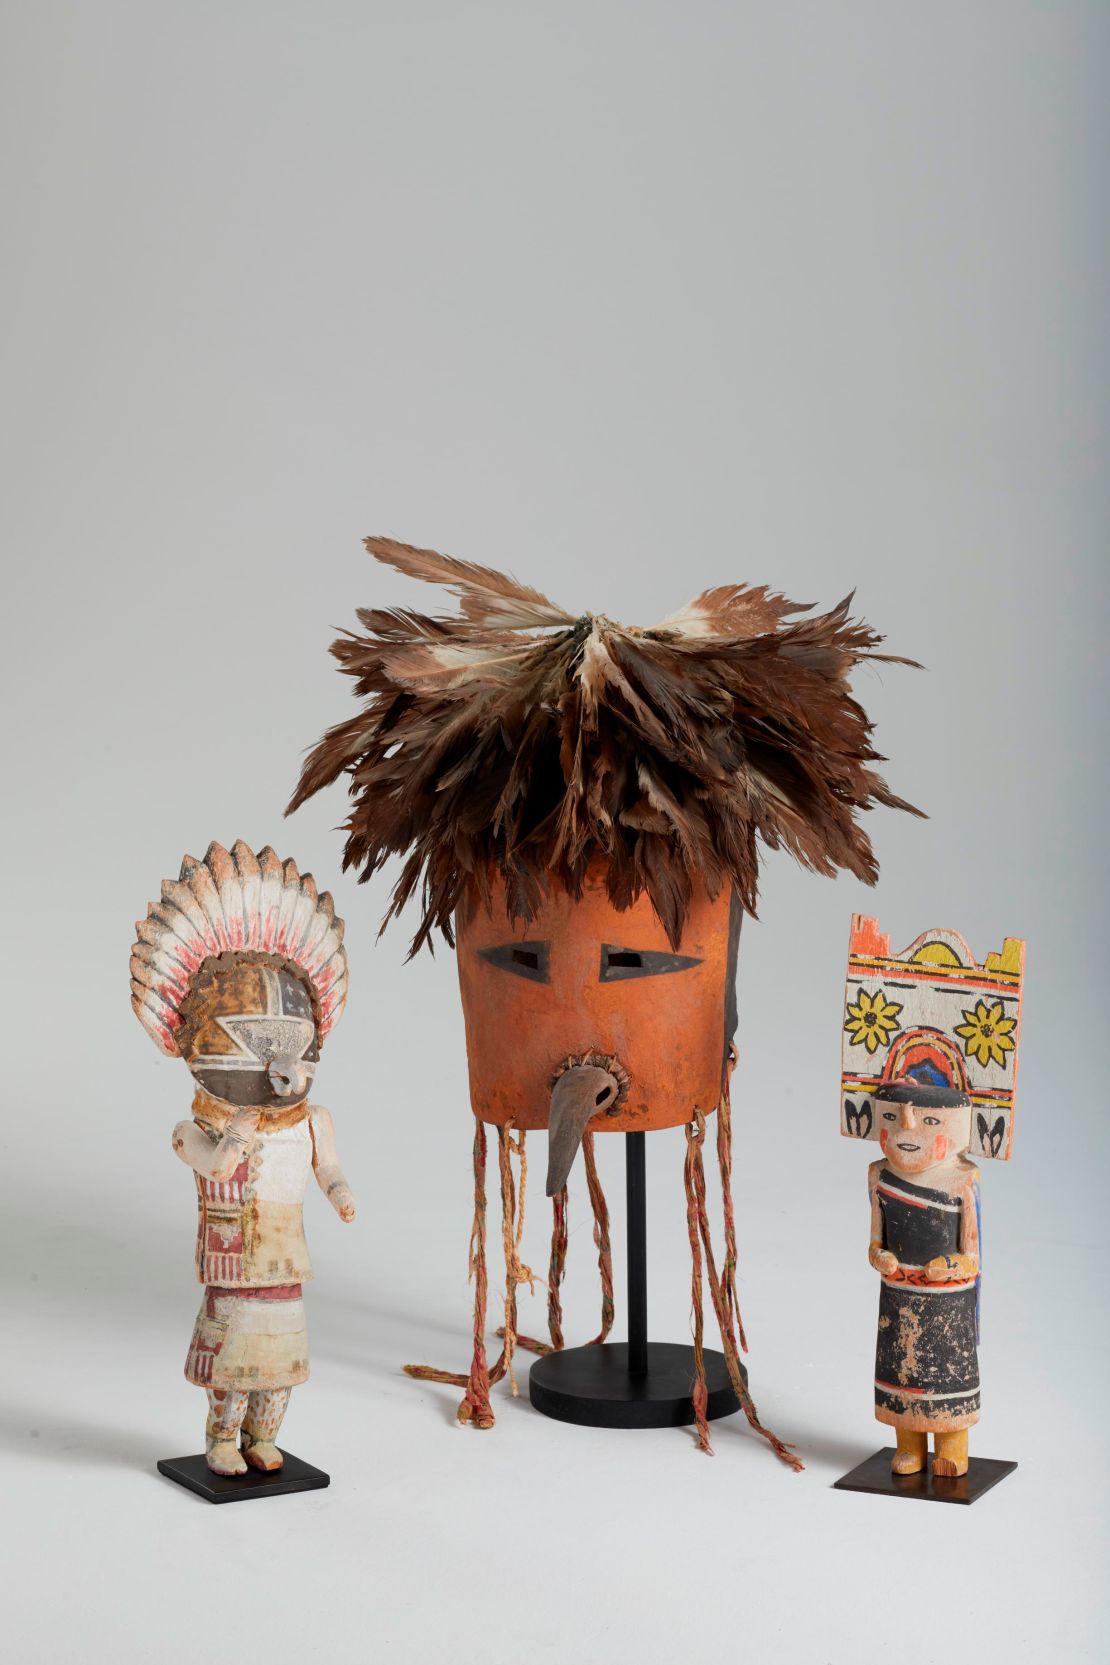 Hopi mask and kachina dolls, late 19th to early 20th century. Eastern cottonwood, leather, pigments, wool, and feathers, private collection